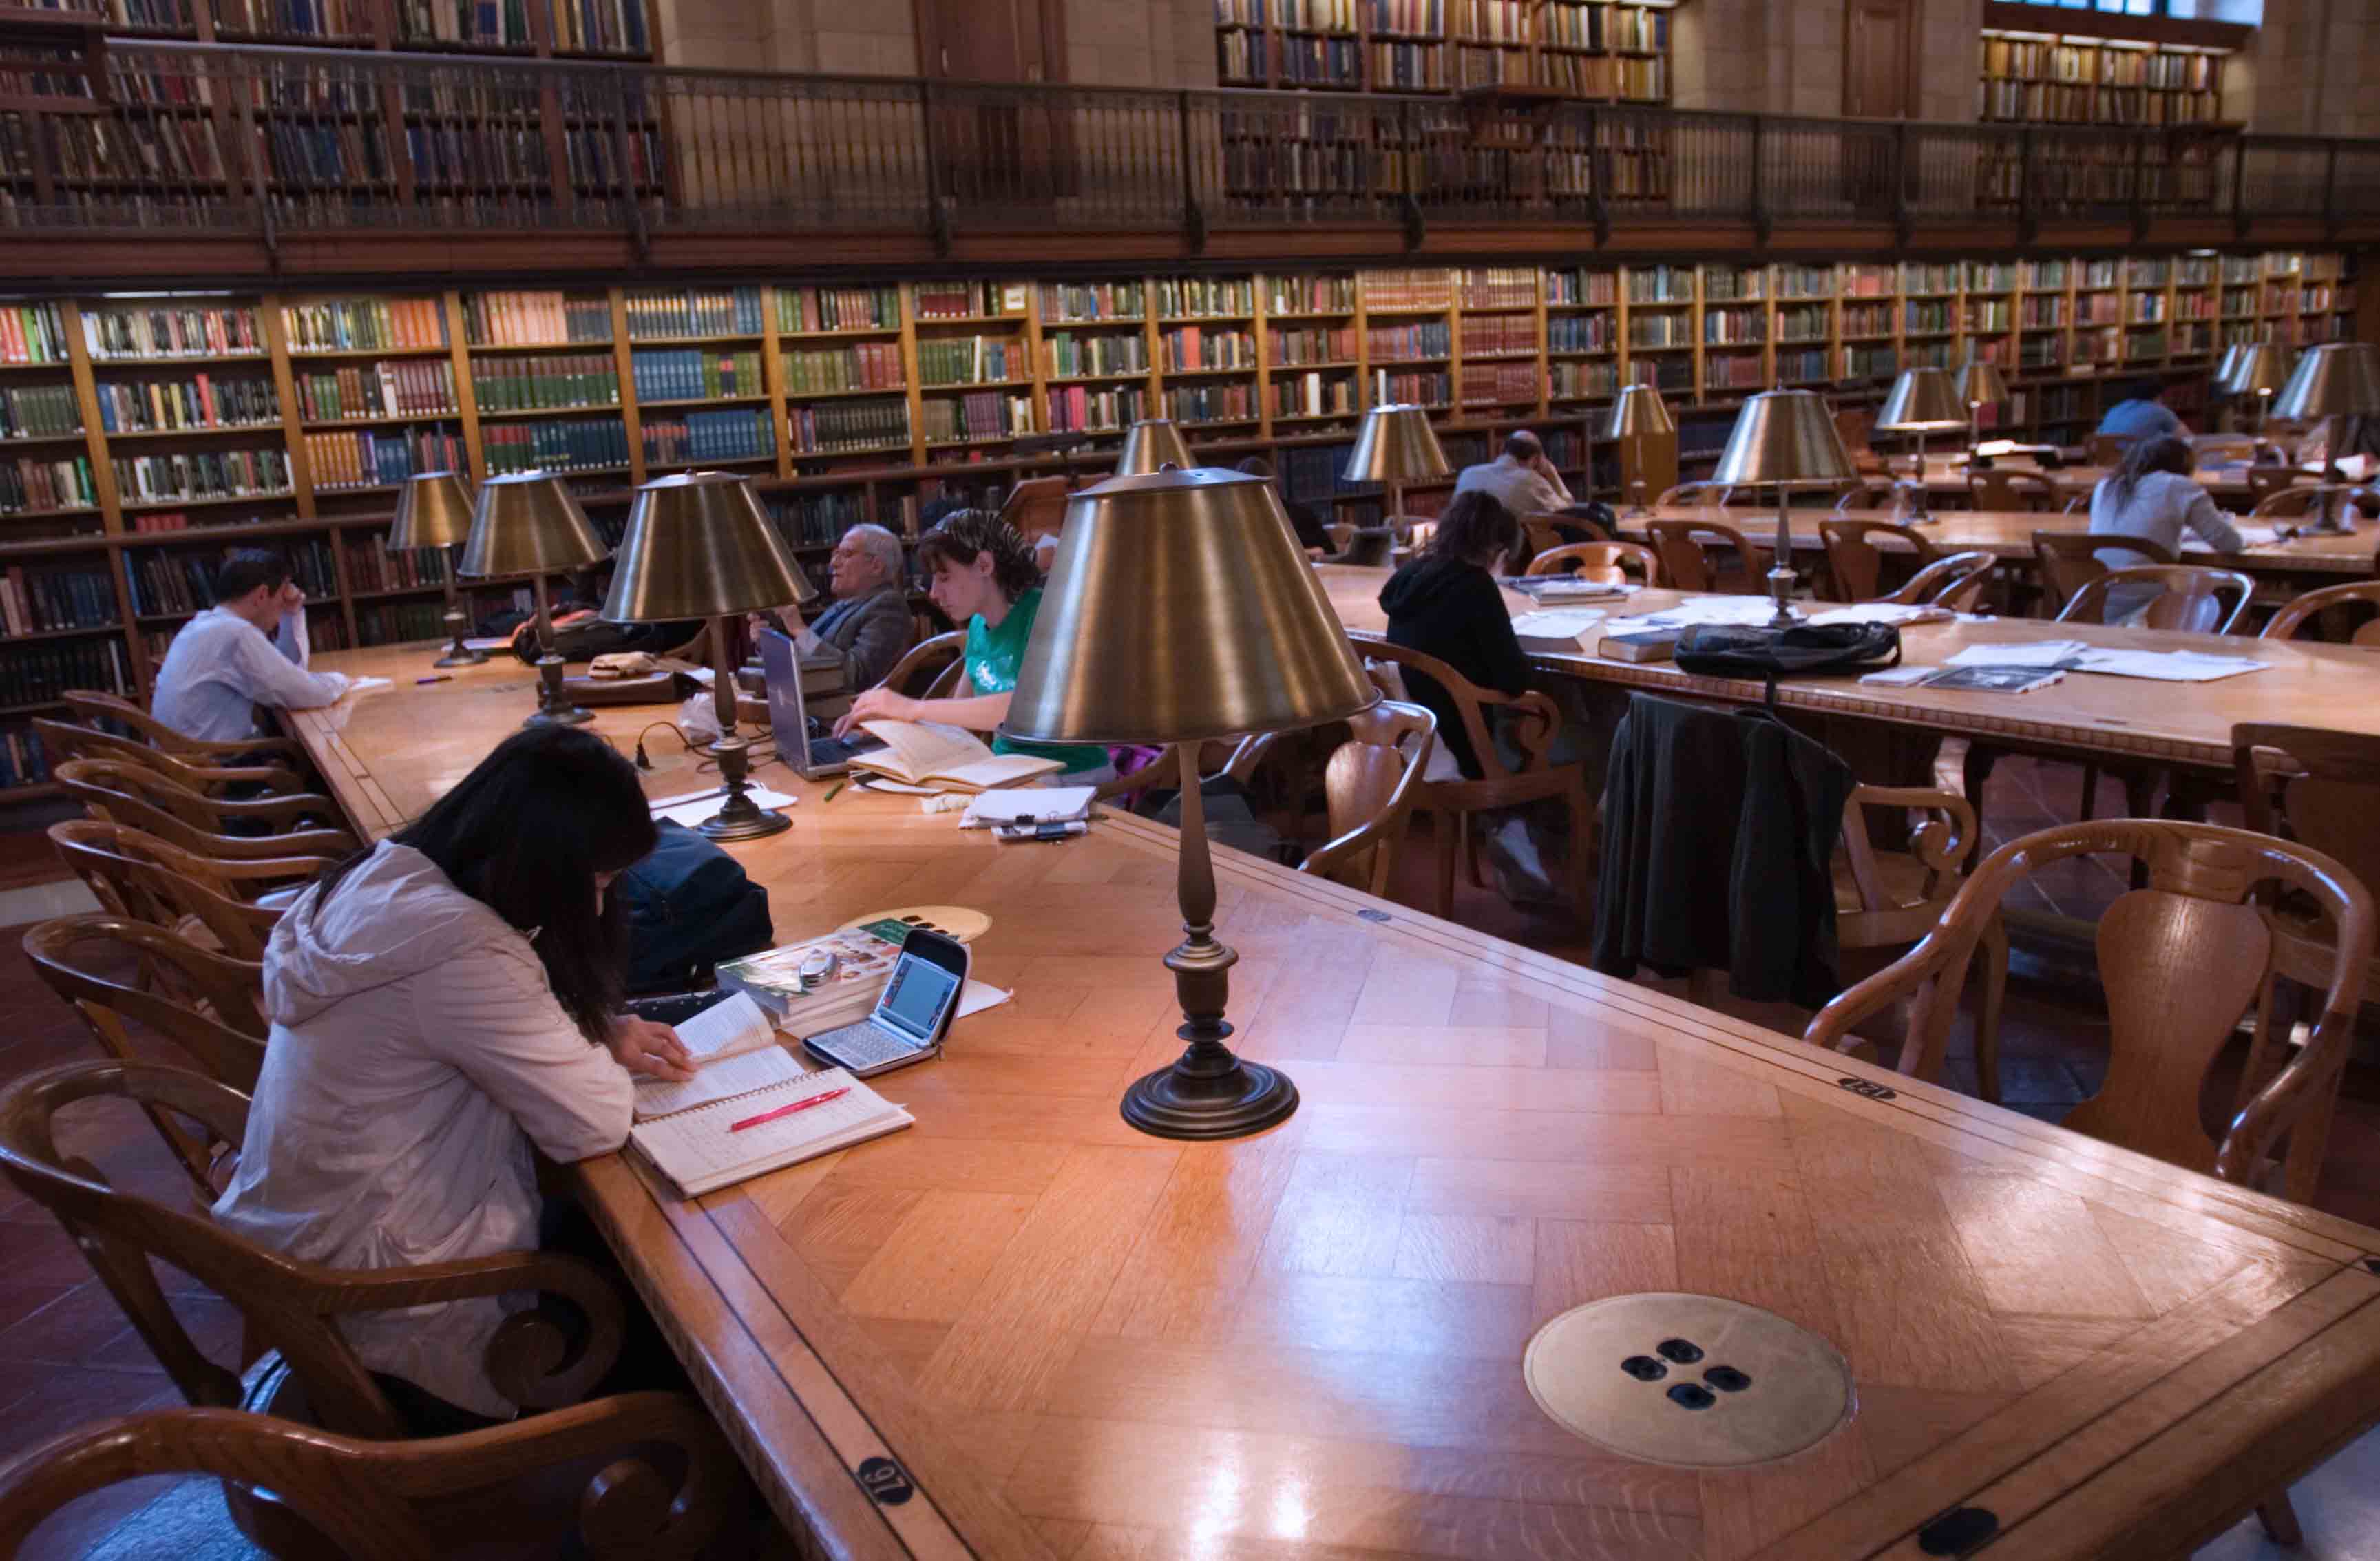 Library as a Social and Cultural Institution